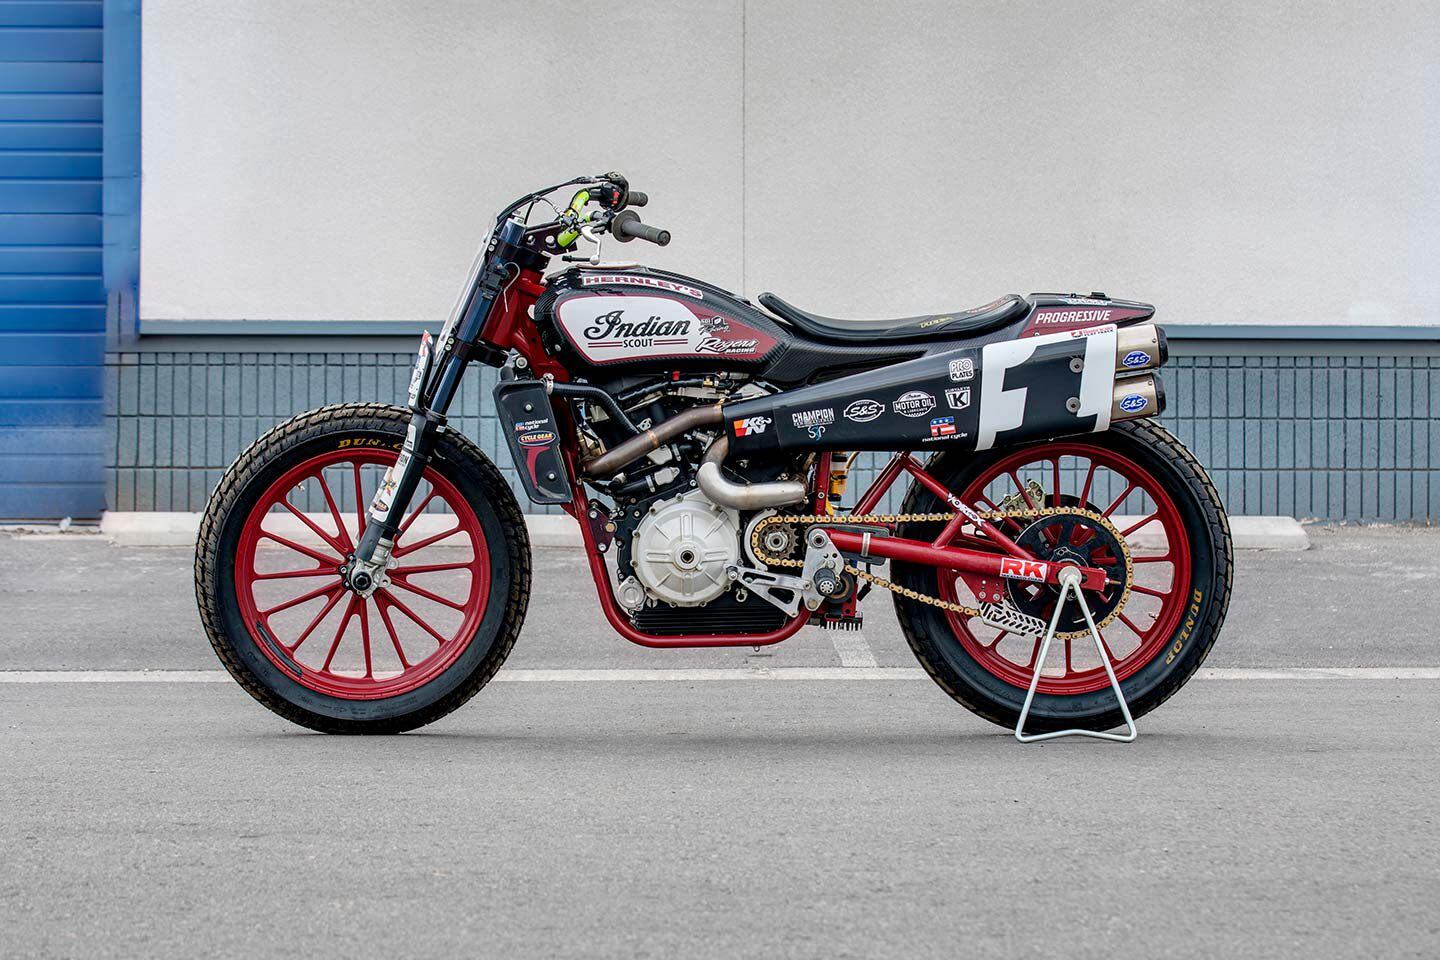 Indian Motorcycle returned to flat-track racing with a roar in 2017, winning the 2018 AFT Twins championship with this custom FTR750 racebike.